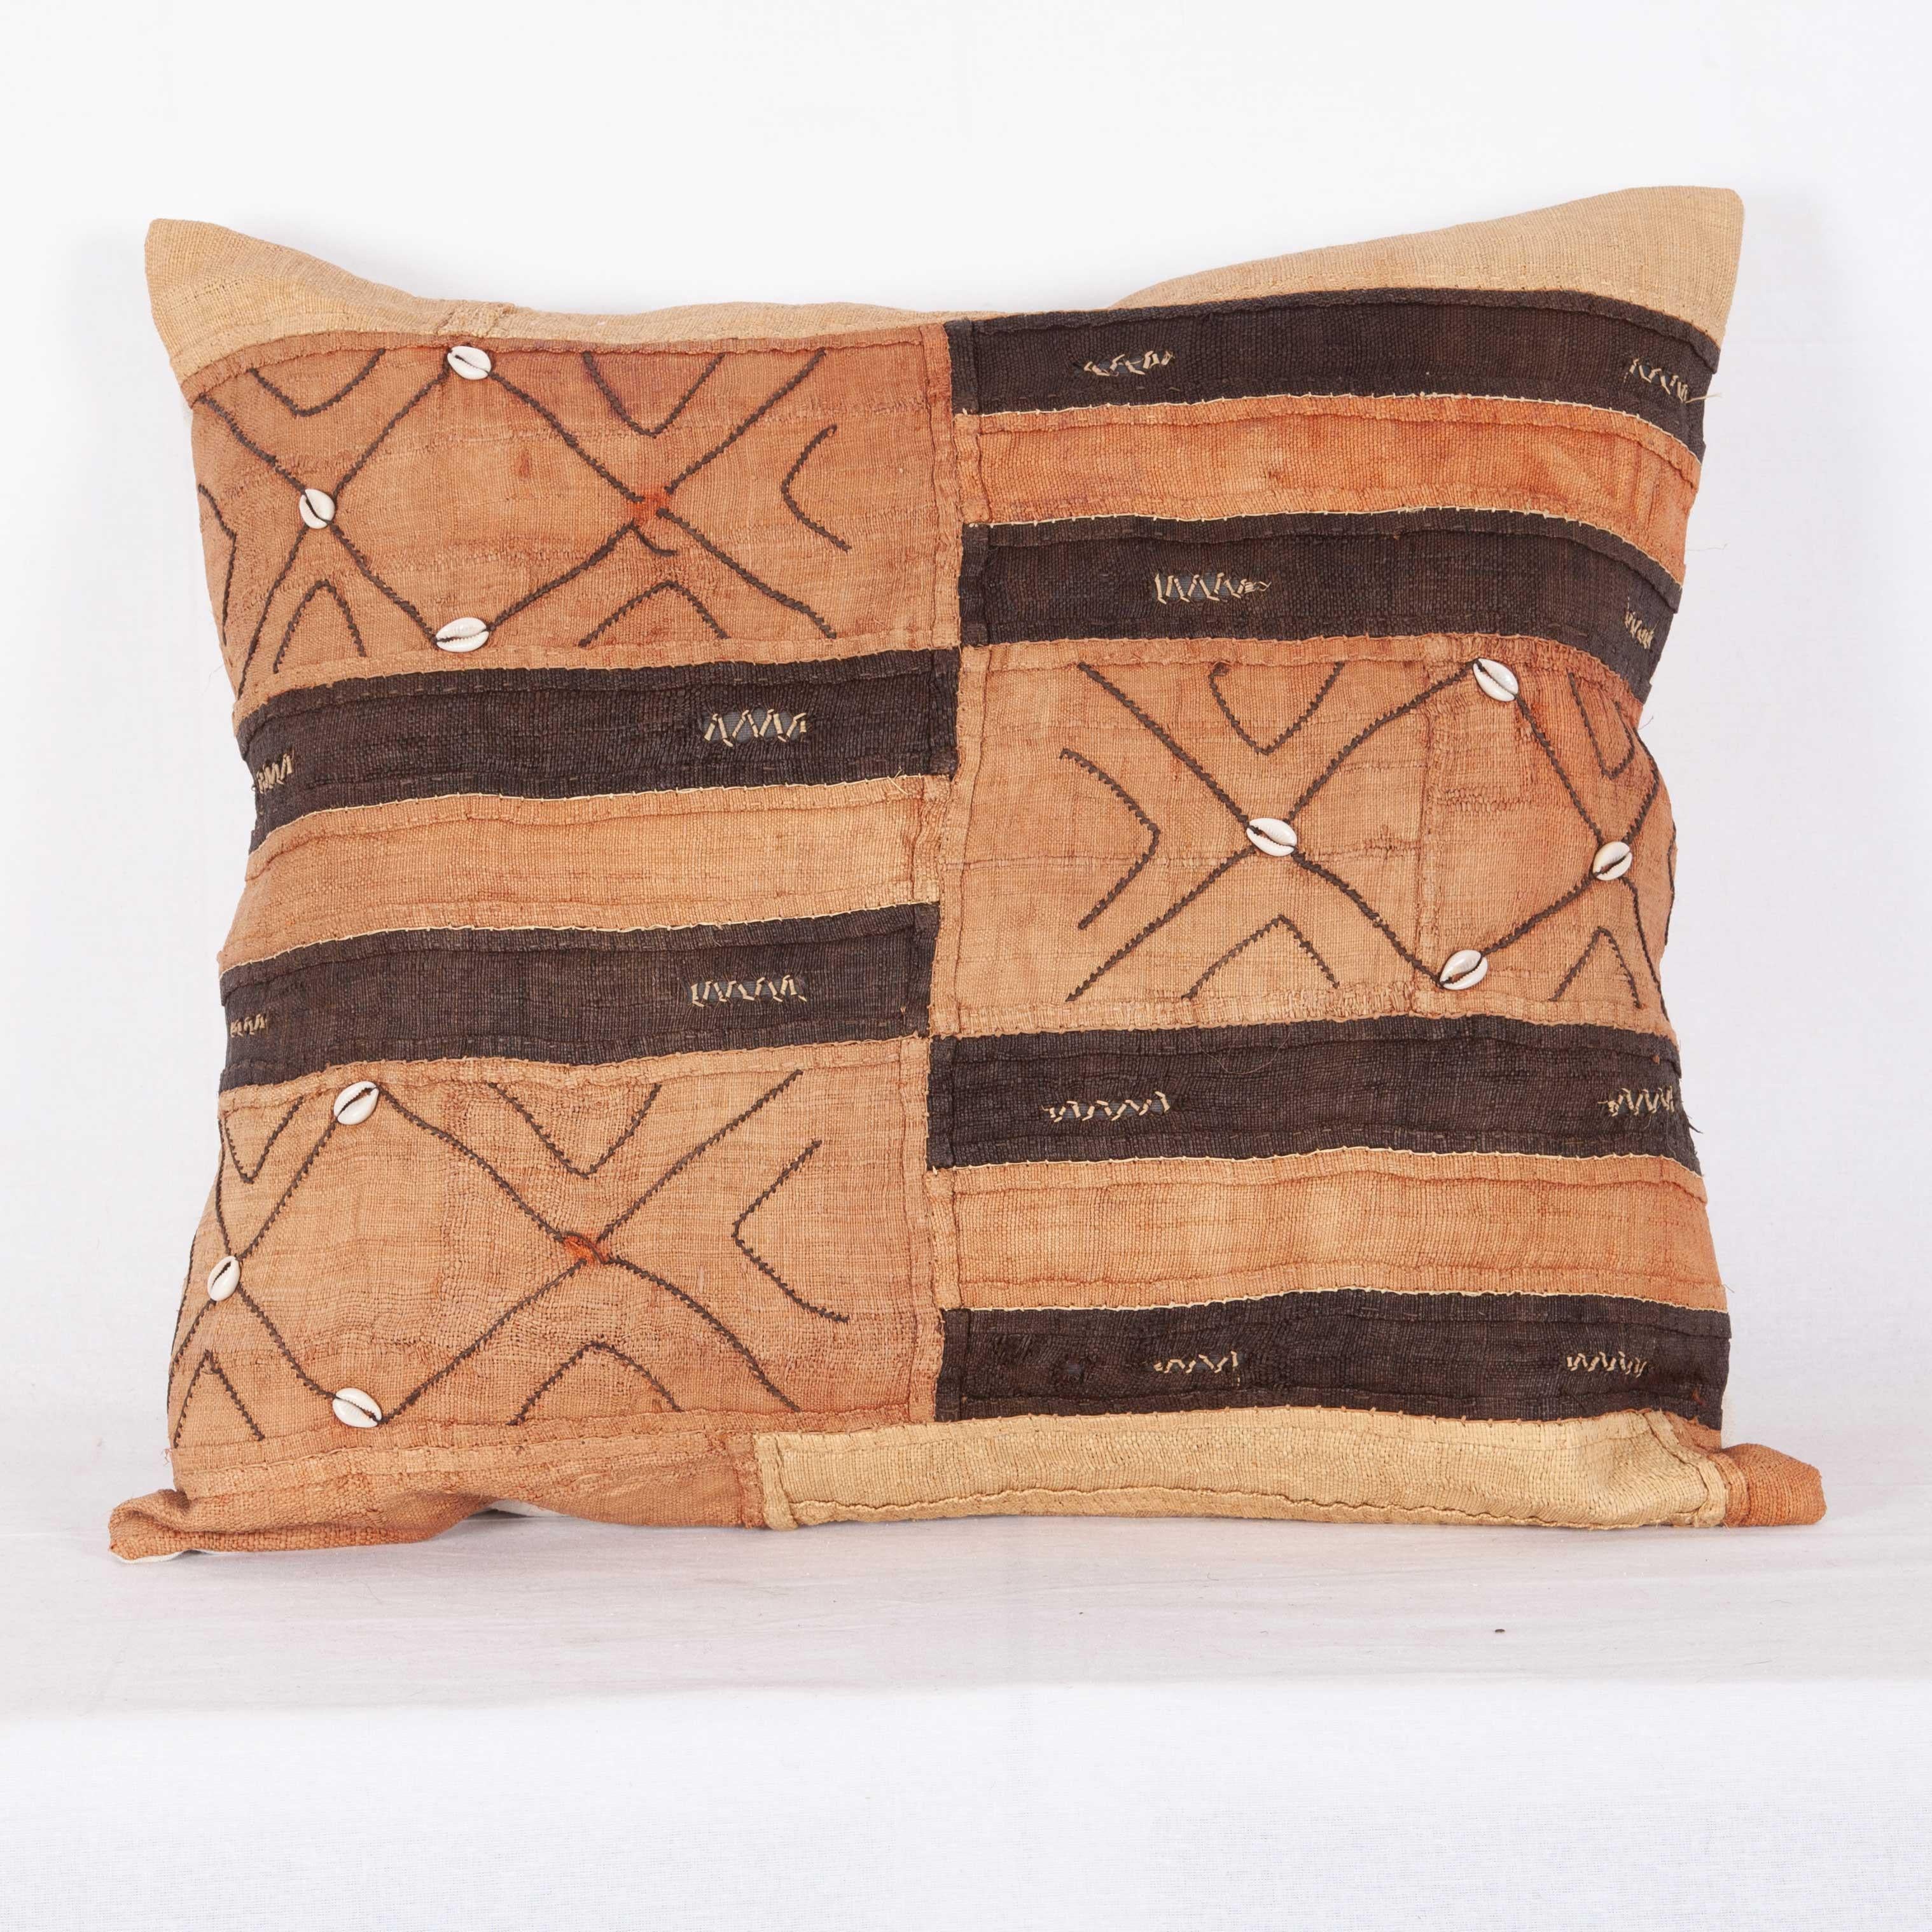 Vintage African Kuba Cloth Pillow Cases, Mid-20th Century For Sale 3